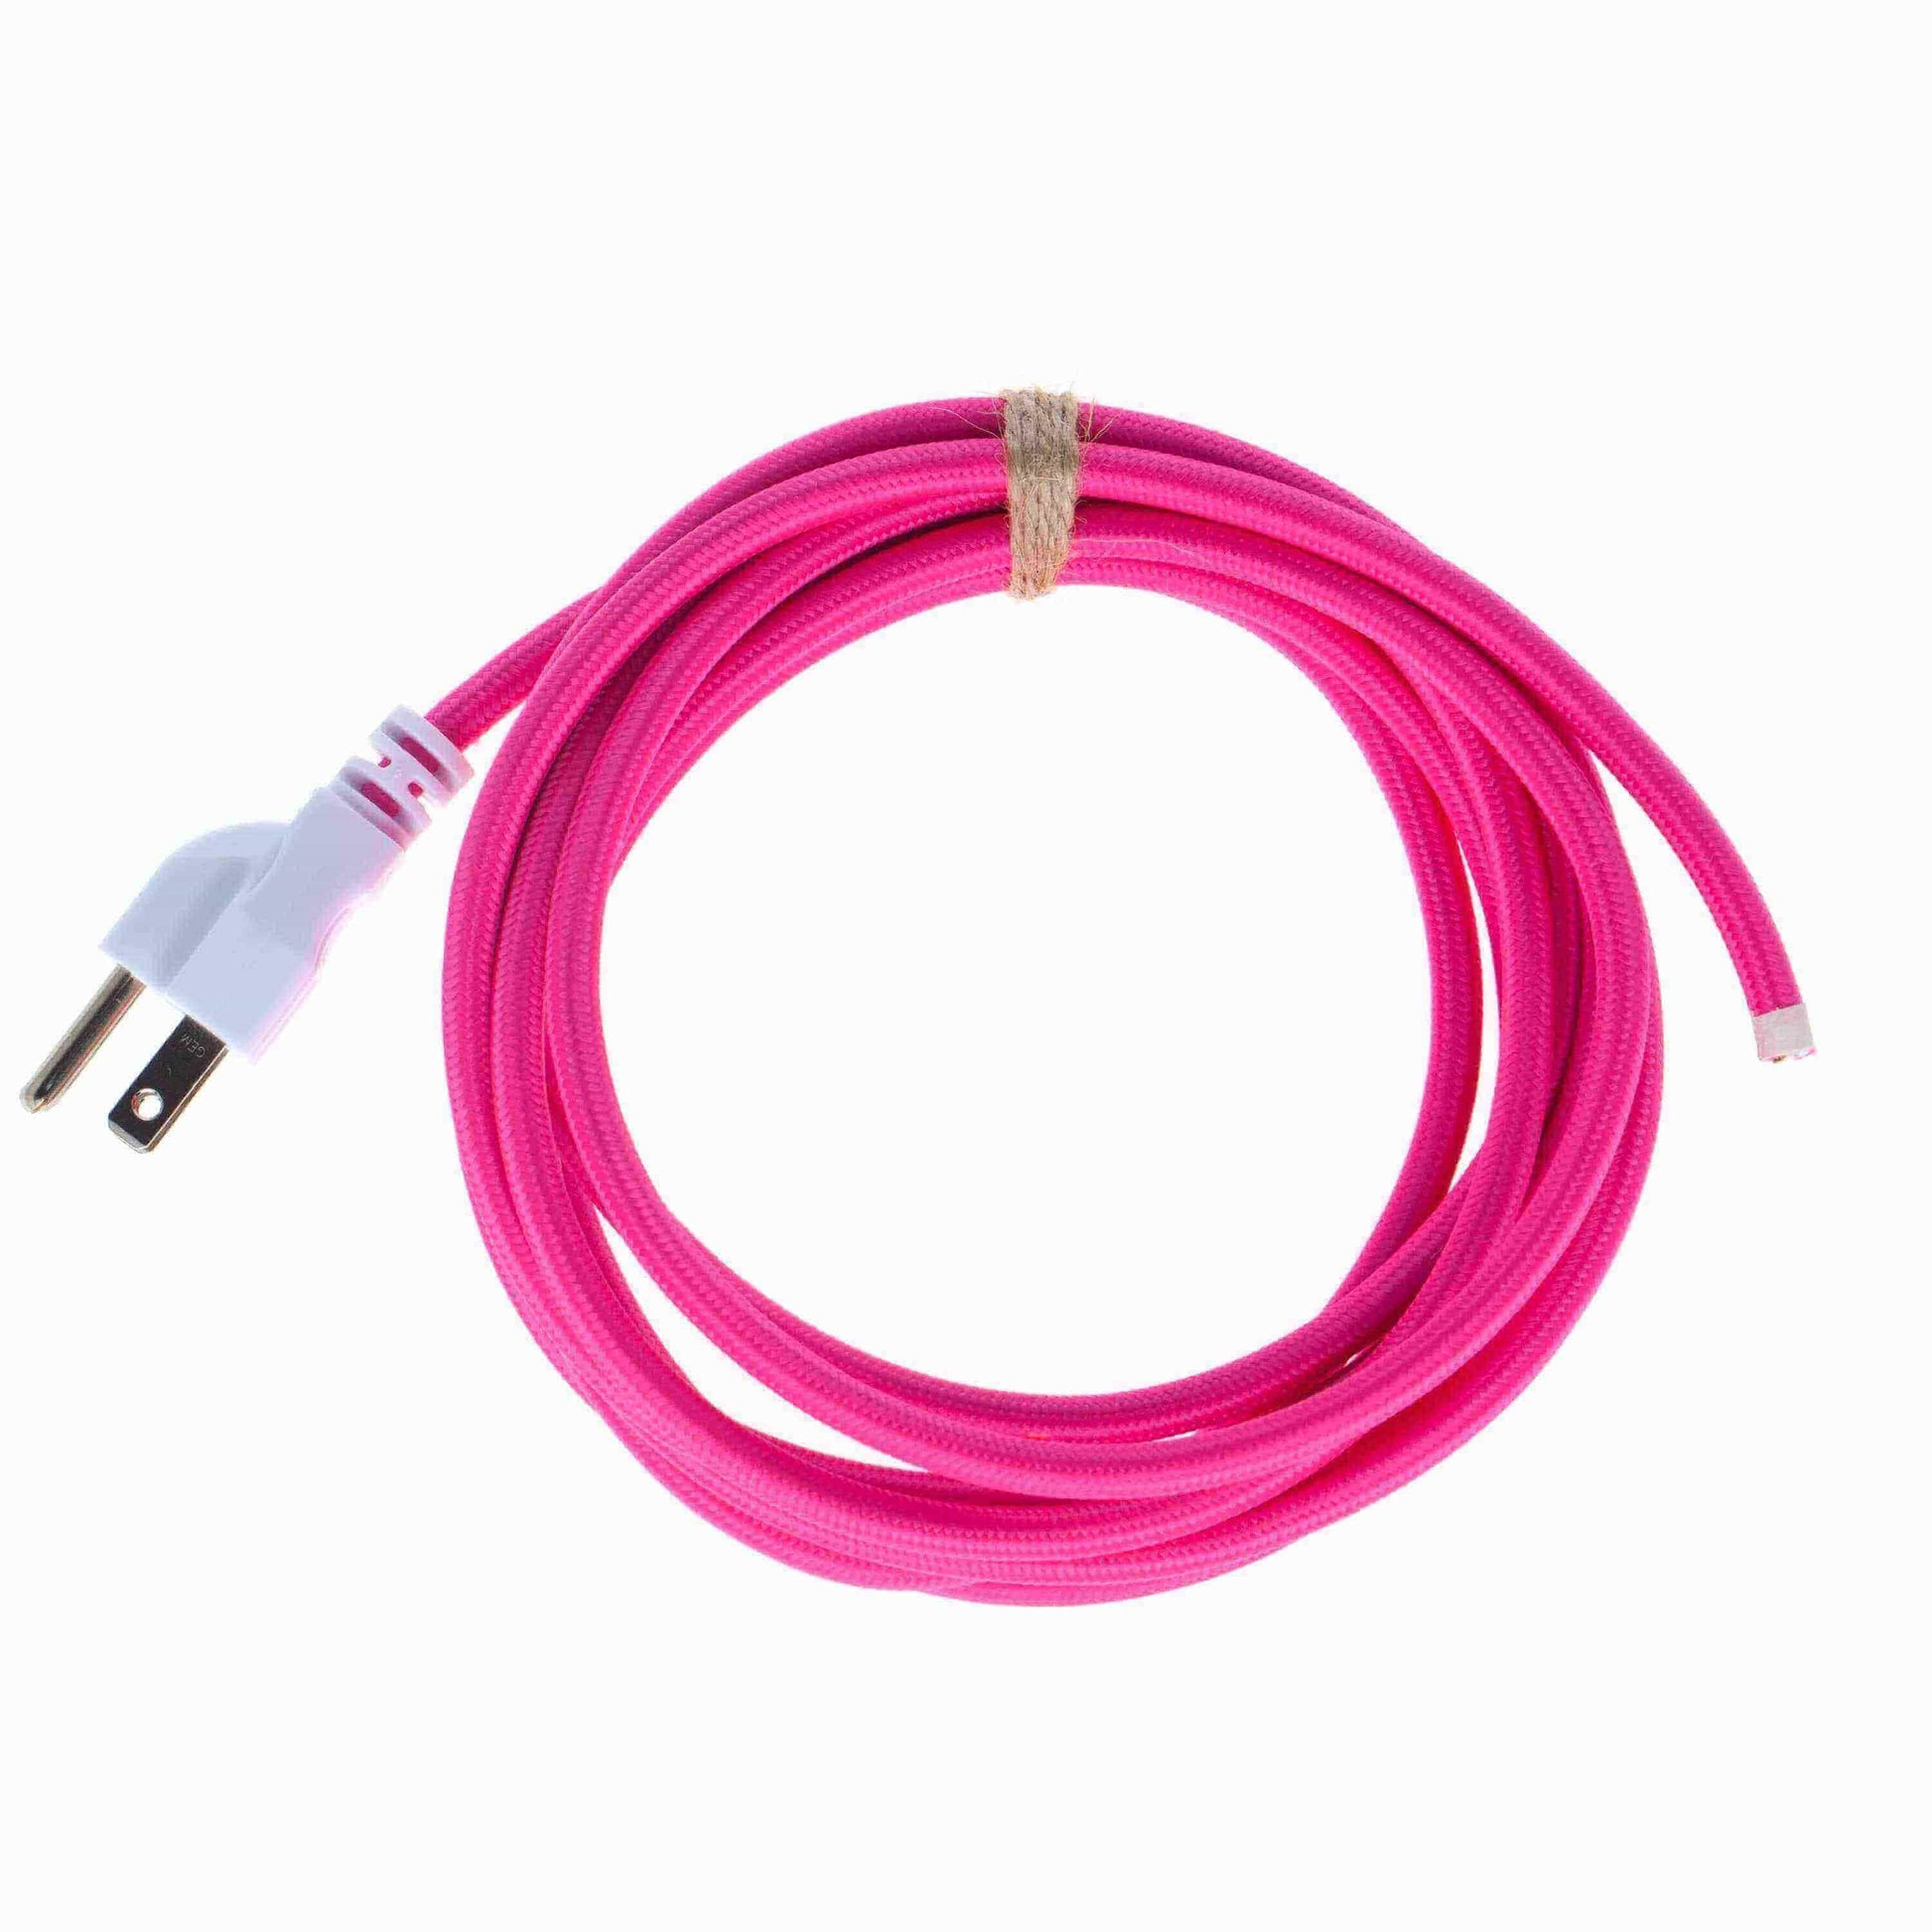 Power Cord Whip - Hot Pink